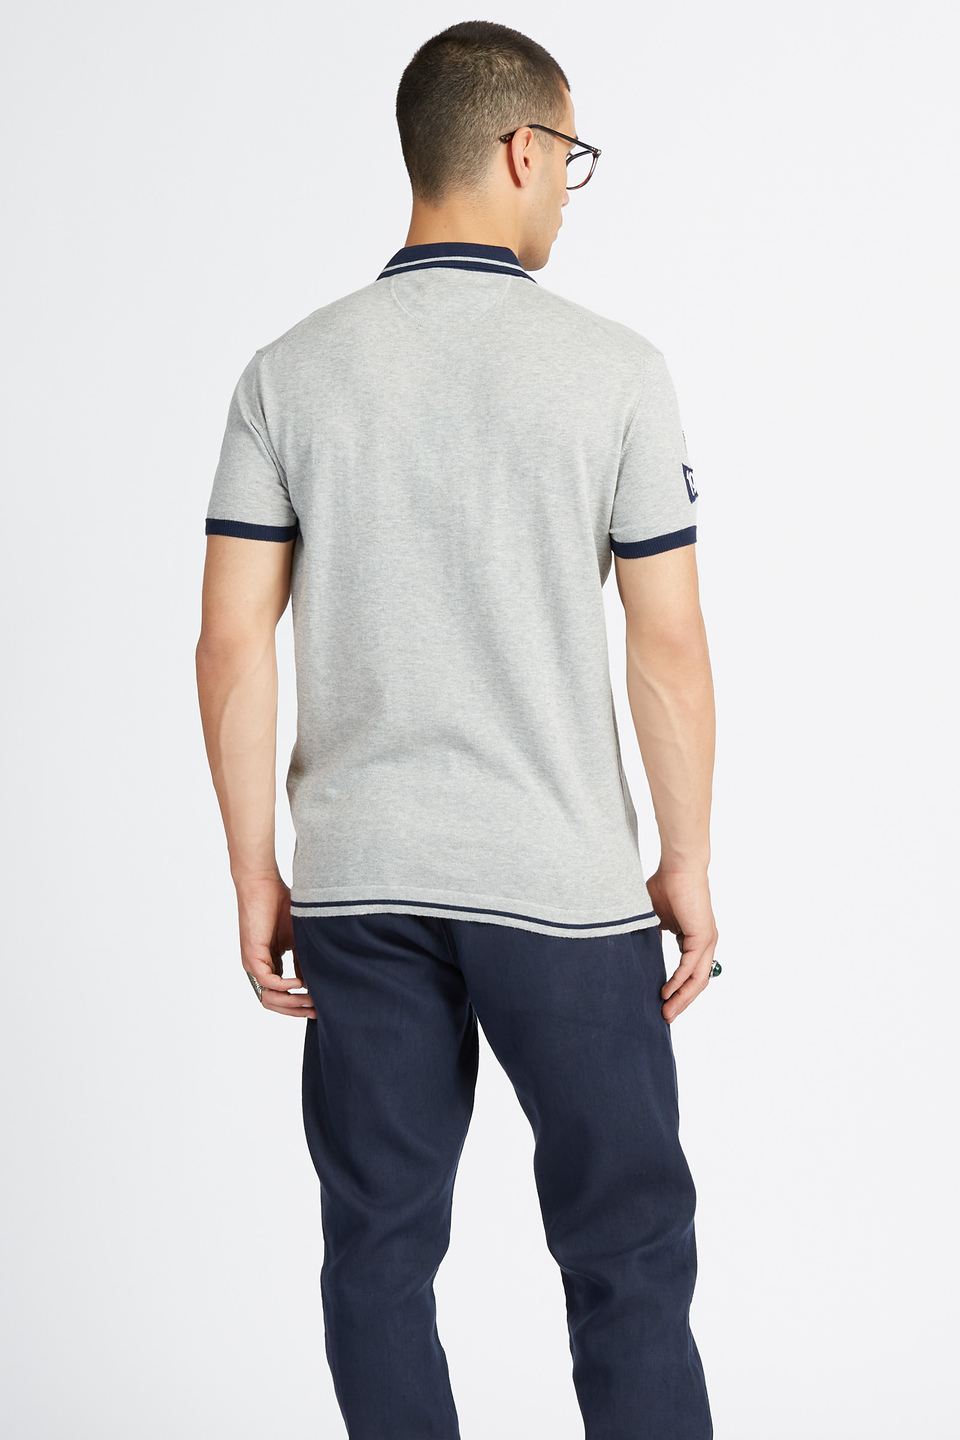 Short-sleeved men's tricot polo in solid color - Victorin | La Martina - Official Online Shop